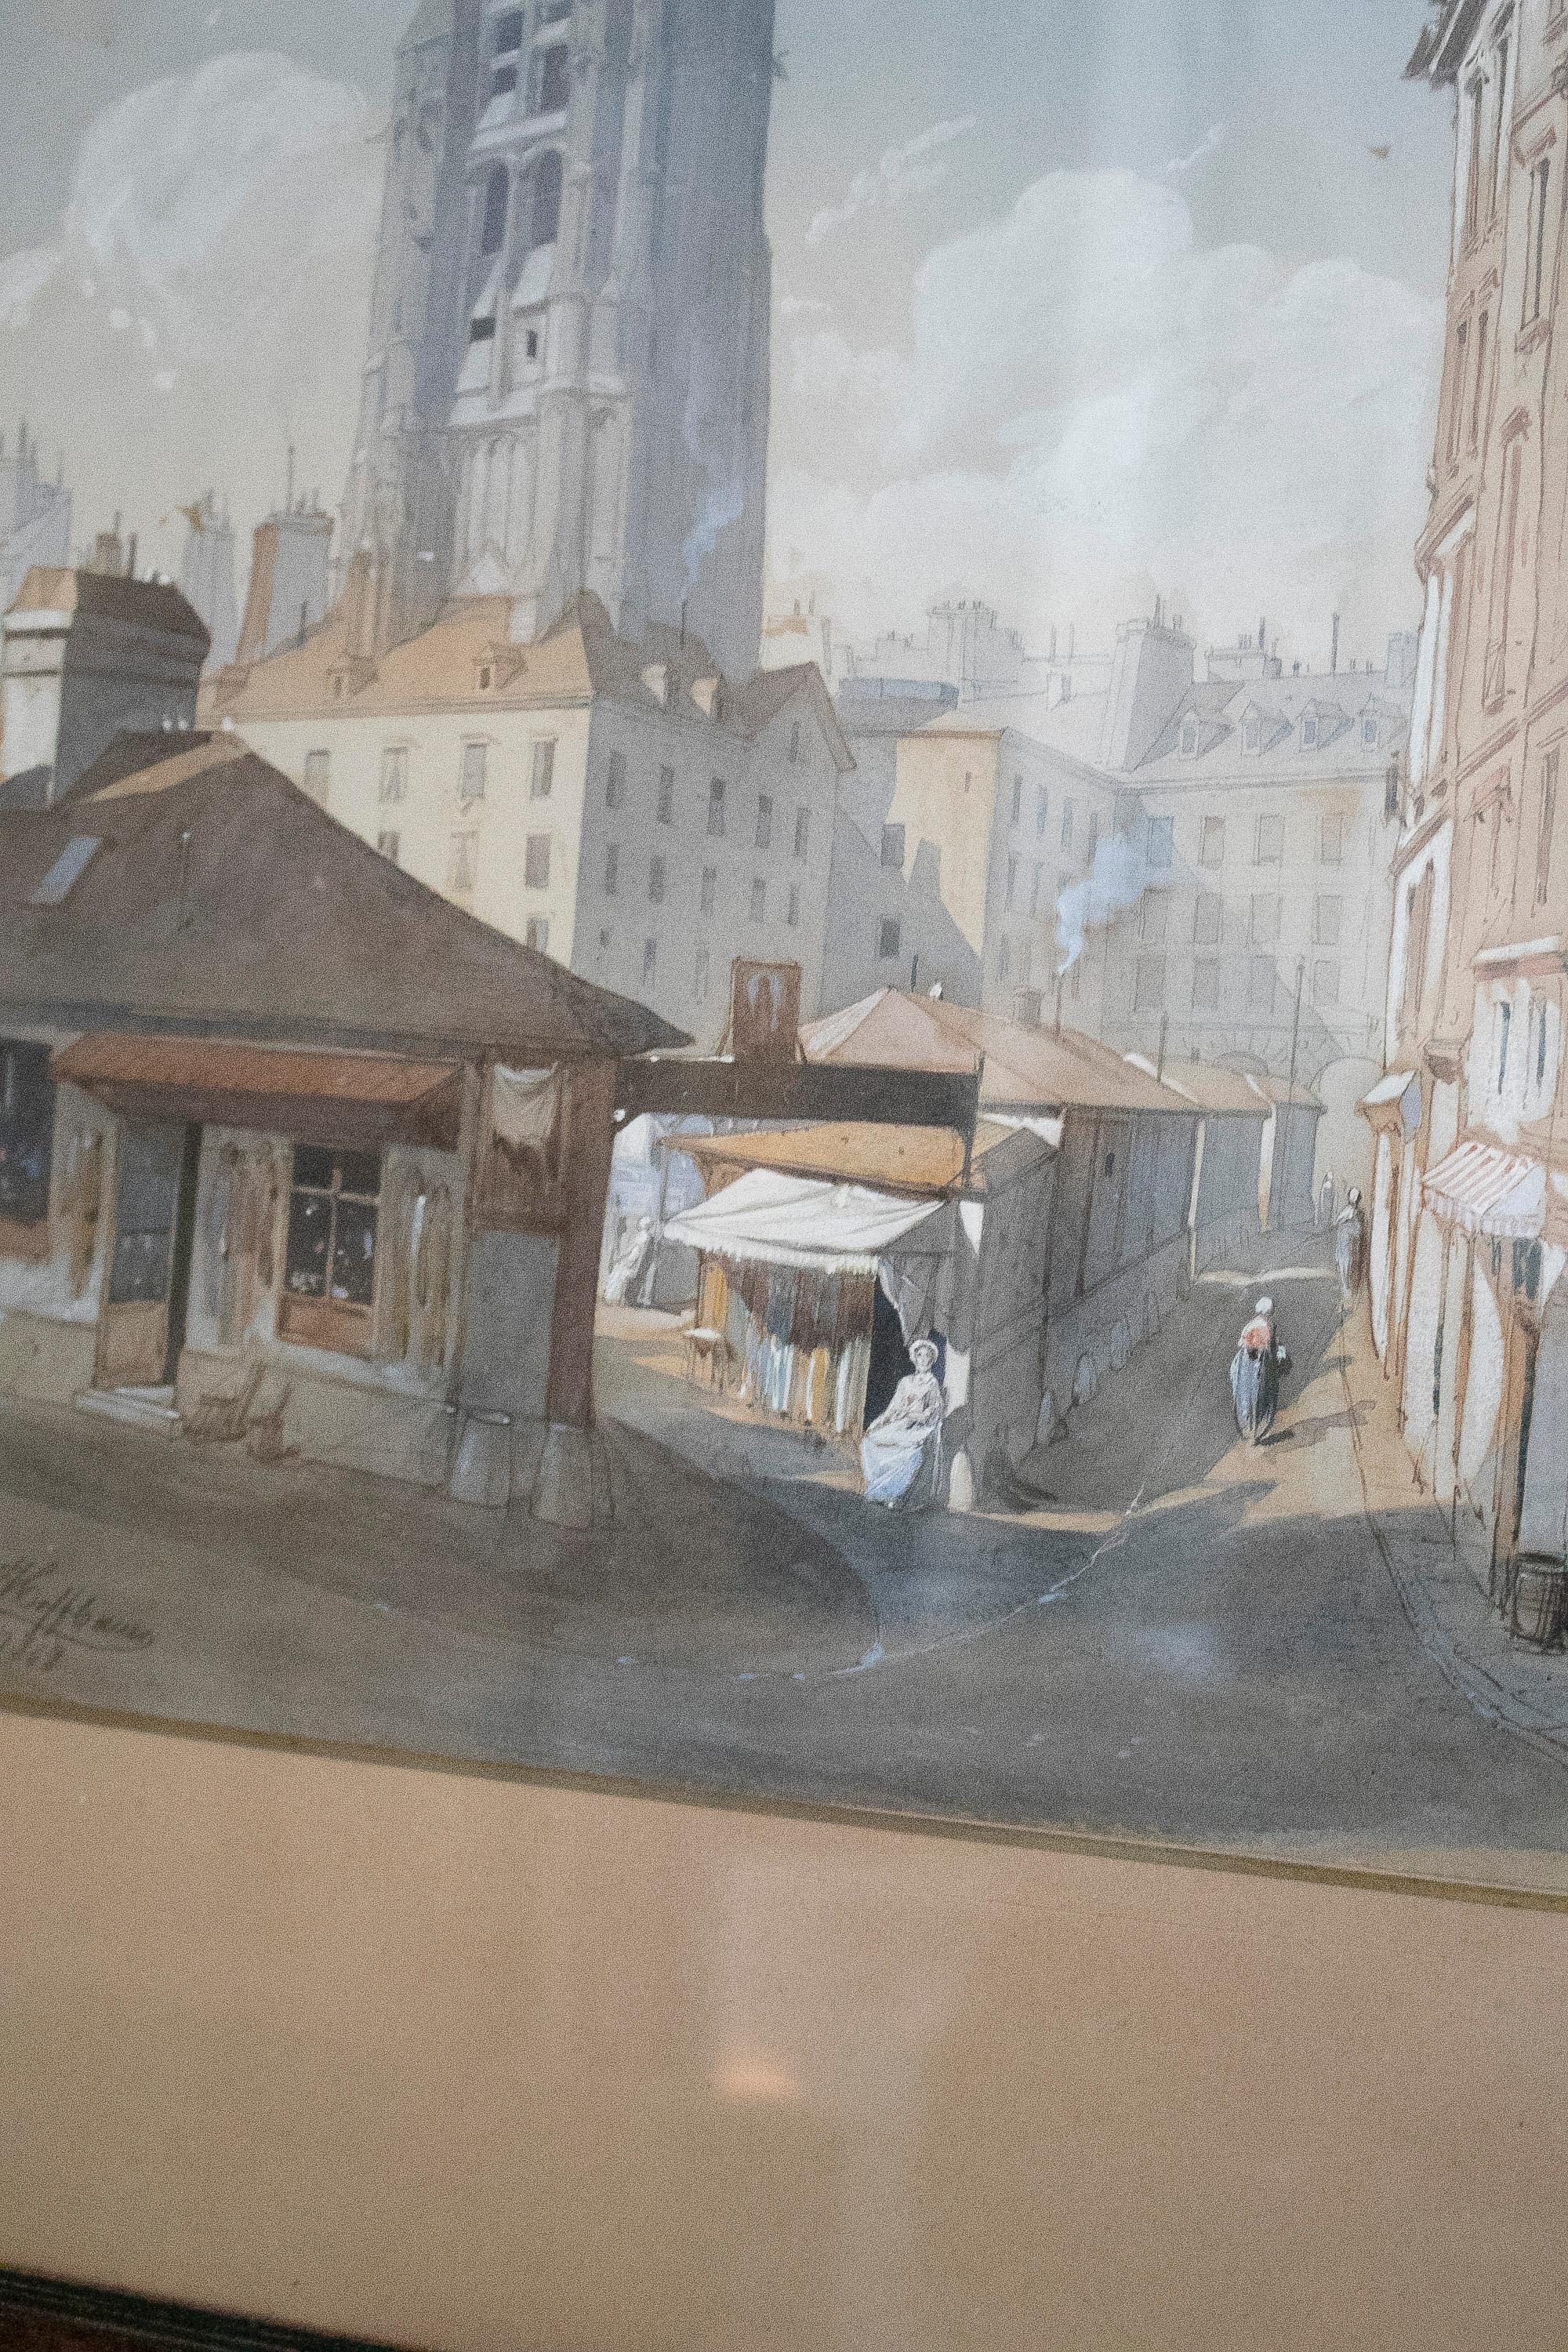 1869 signed watercolour of a French city landscape with a Gothic style medieval tower reminiscent of Notre-Dame

Measure with frame: 60 x 48 x 2cm.